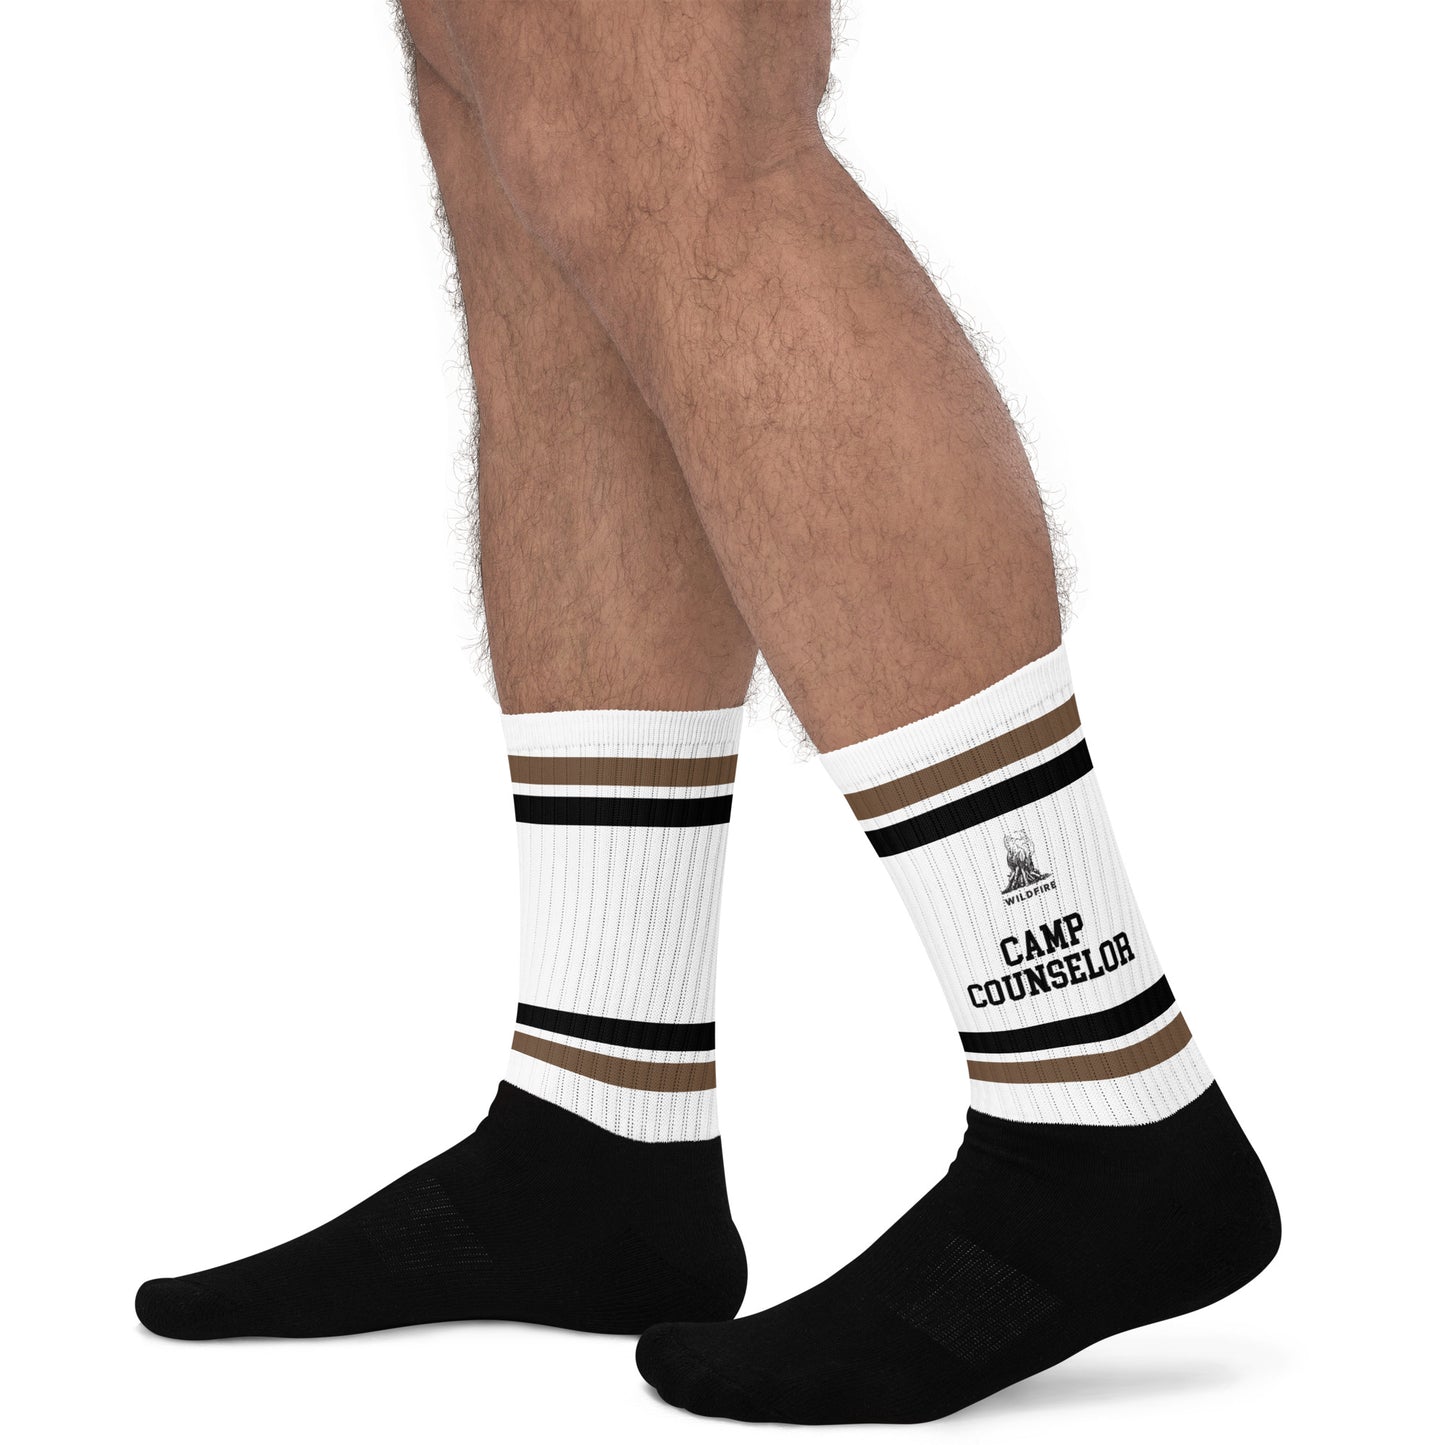 Wildfire Cigars Camp Counselor Socks in brown black and white